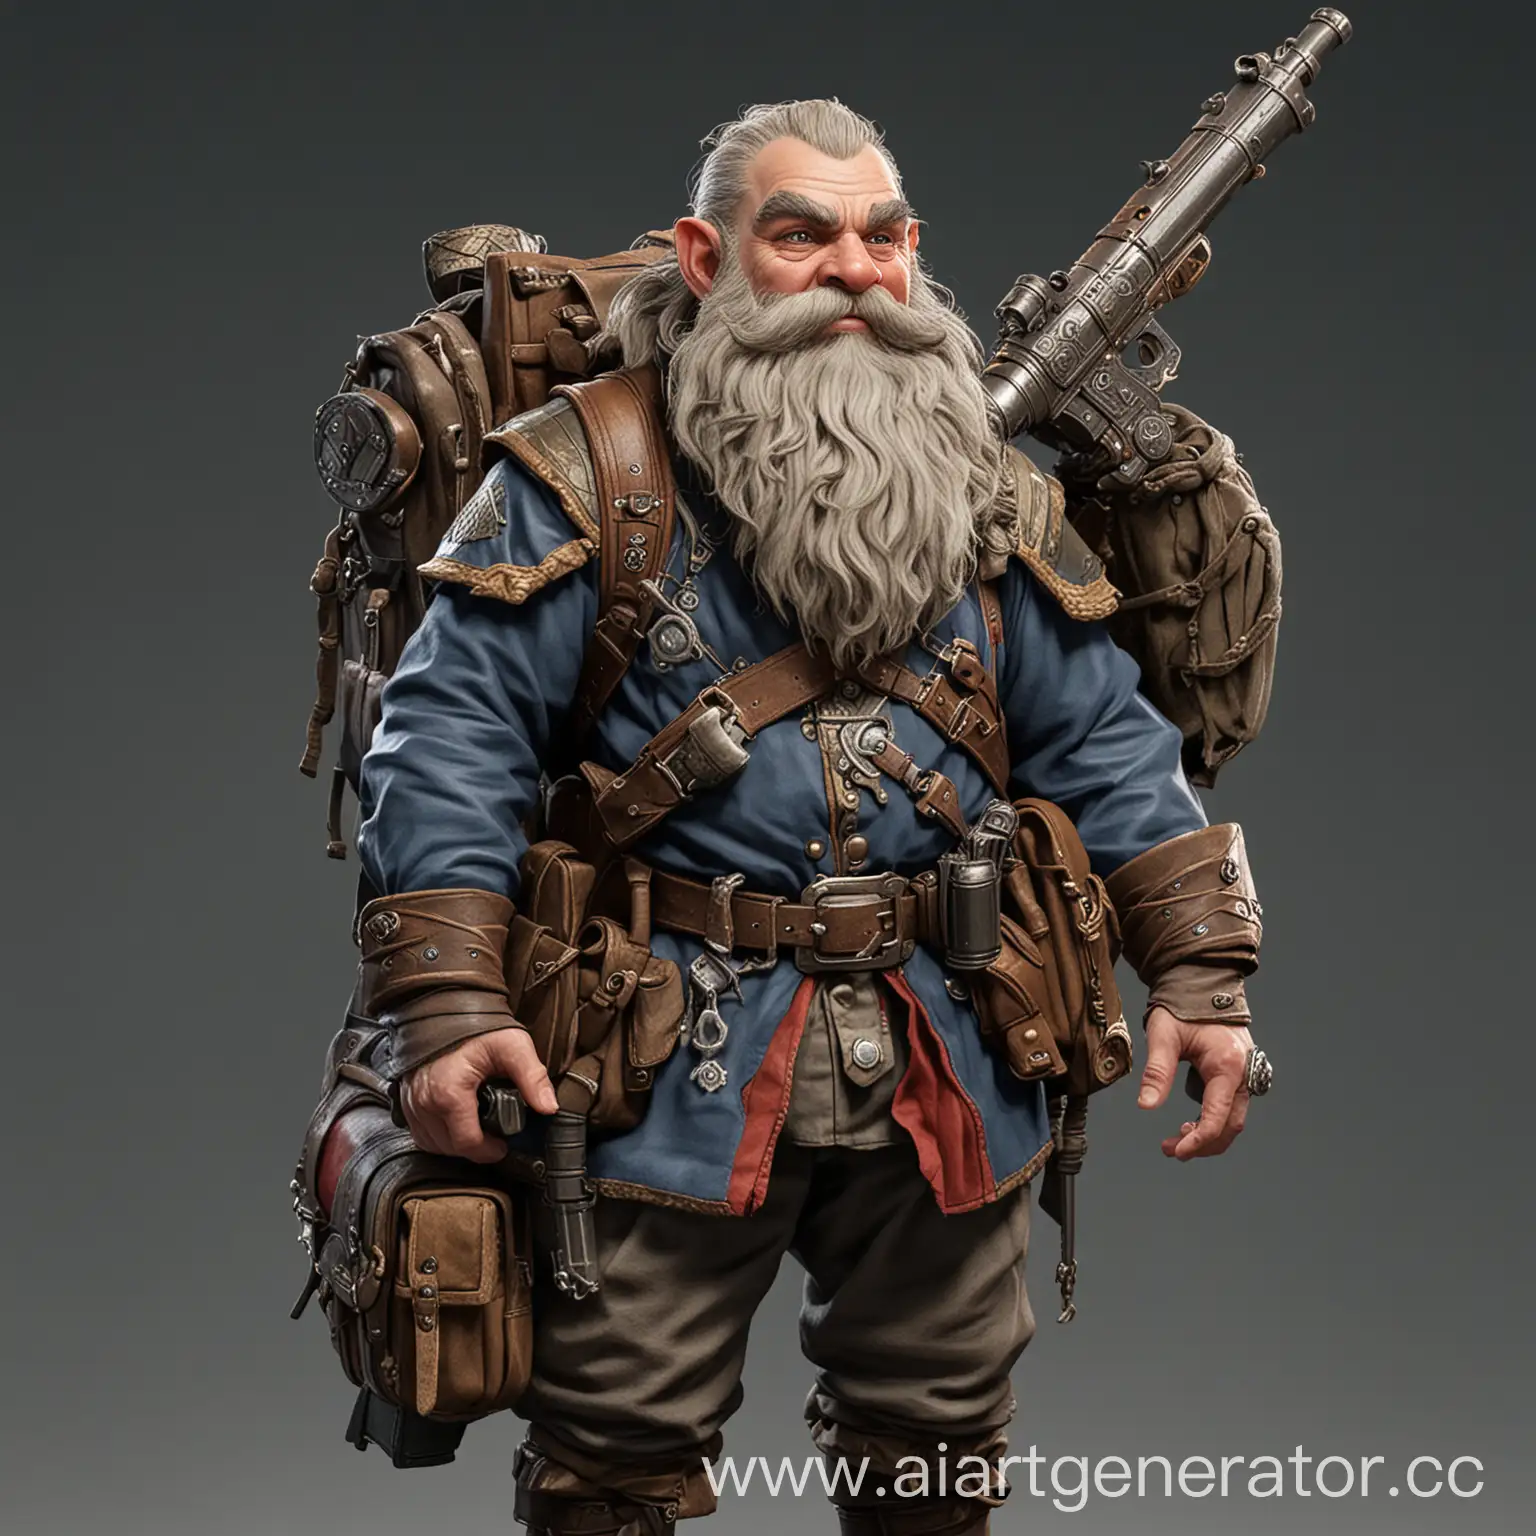 Dwarf-in-DND-Campaign-Clothes-with-Vintage-Powder-Rifle-and-Backpack